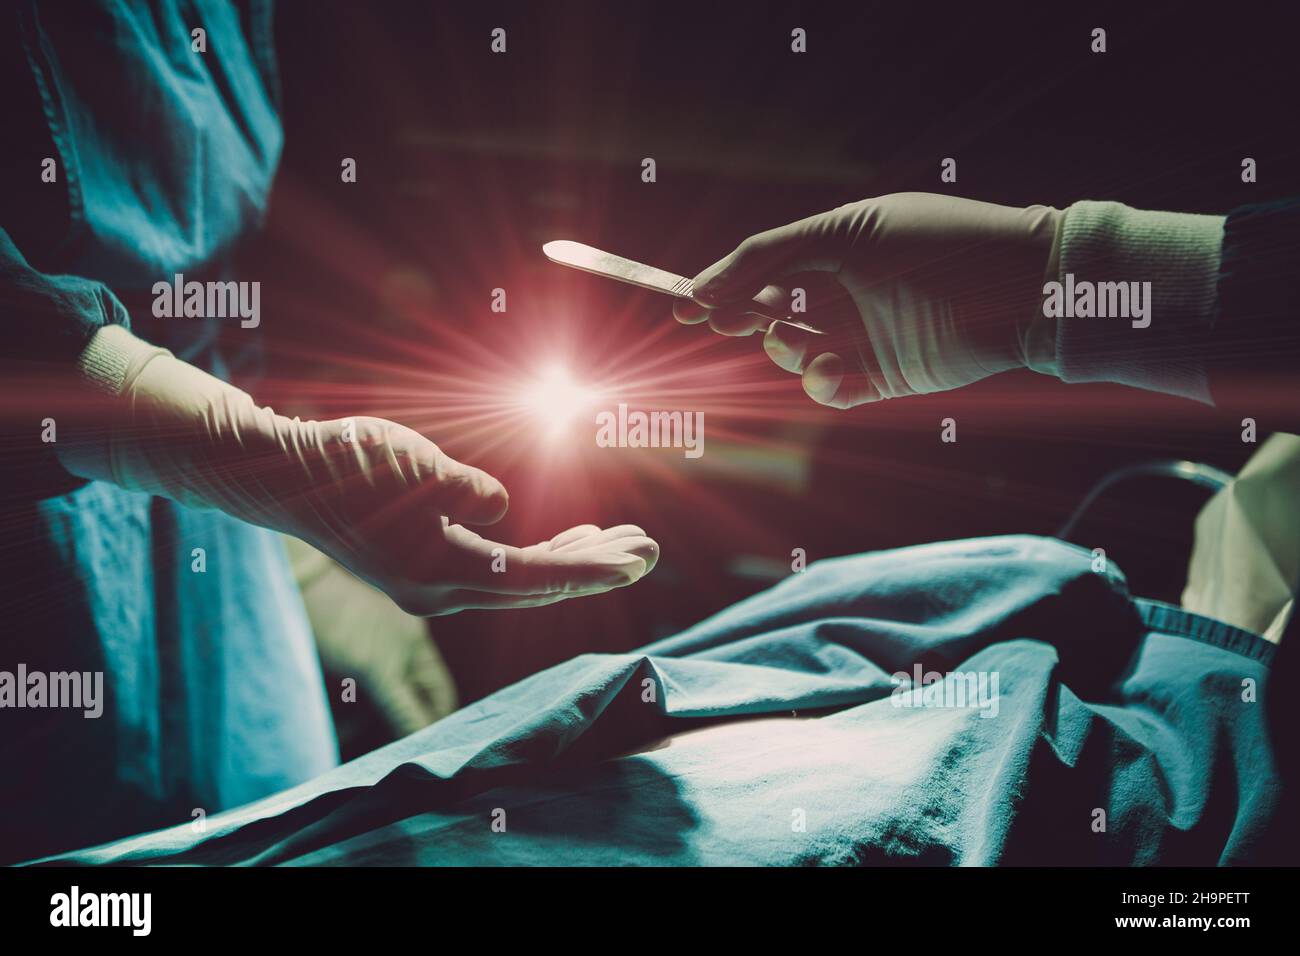 doctor operating patient in hospital sending Surgical Blade with light flare for giving life with organ donor concept. Stock Photo